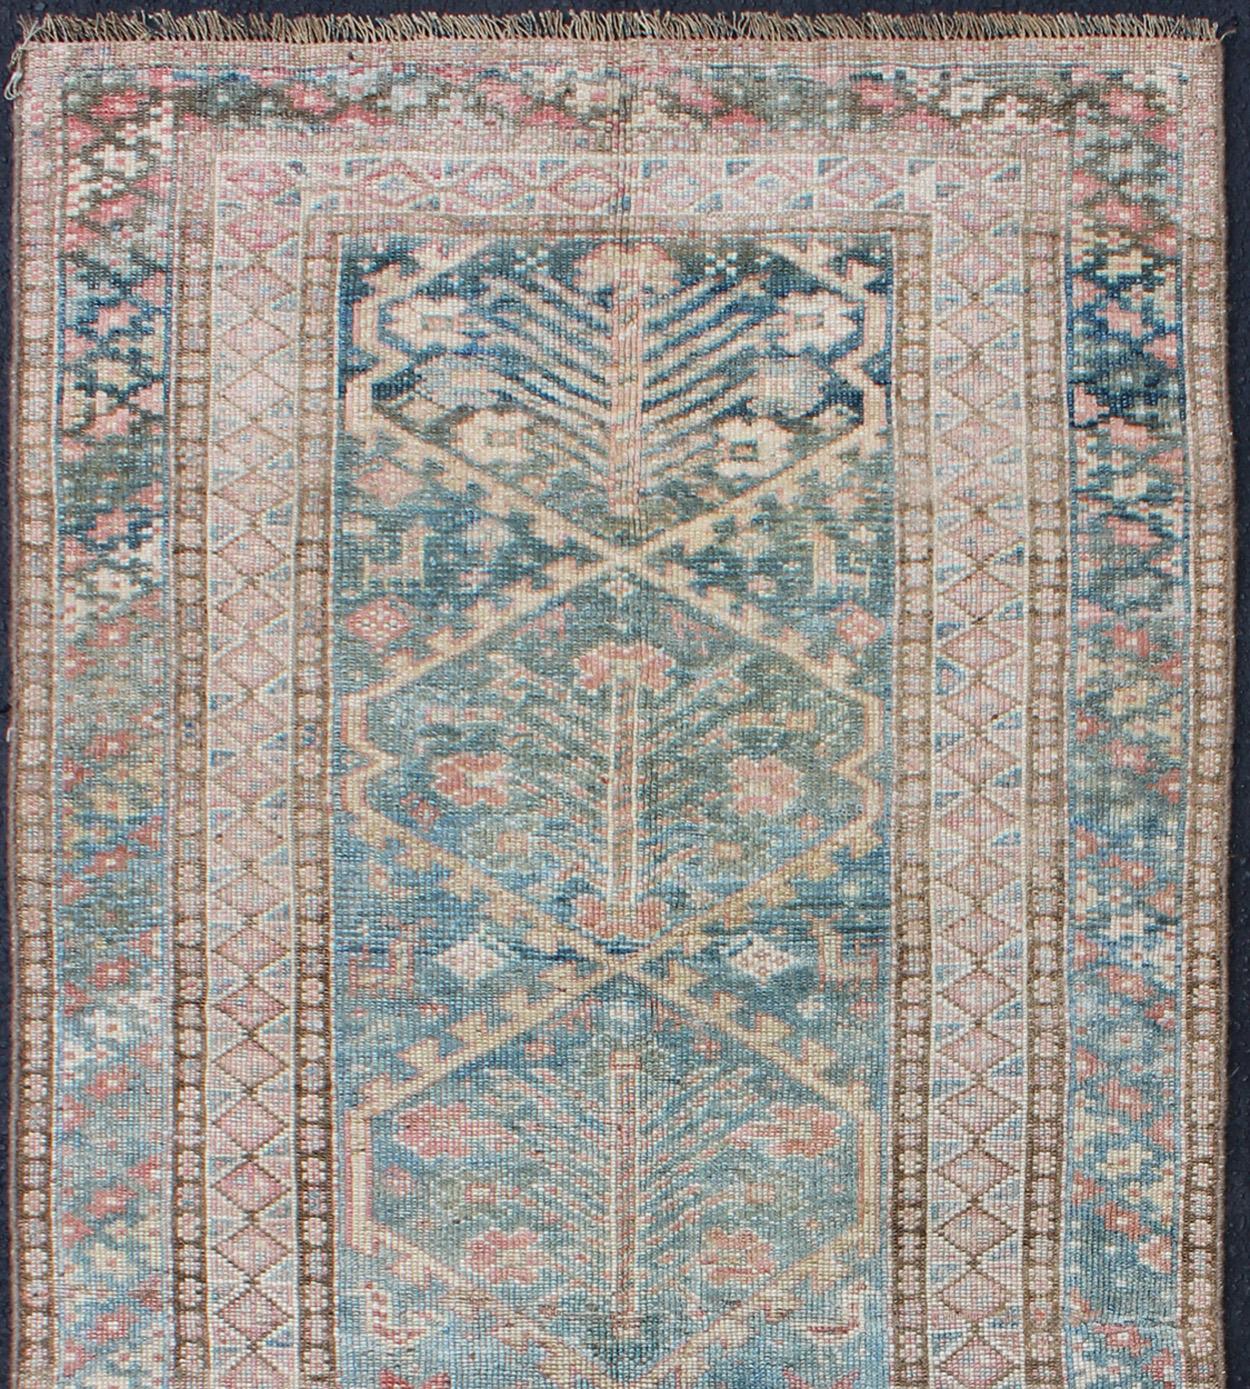 Antique Persian small Lori Bakhtiari rug in light teal and pink. Geometric all over Lori antique rug, keivan woven Arts / rug / EMA-7542, country of origin / type: Iran / Malayer, circa 1910.

Measures: 3' x 6'9.

This beautiful antique early